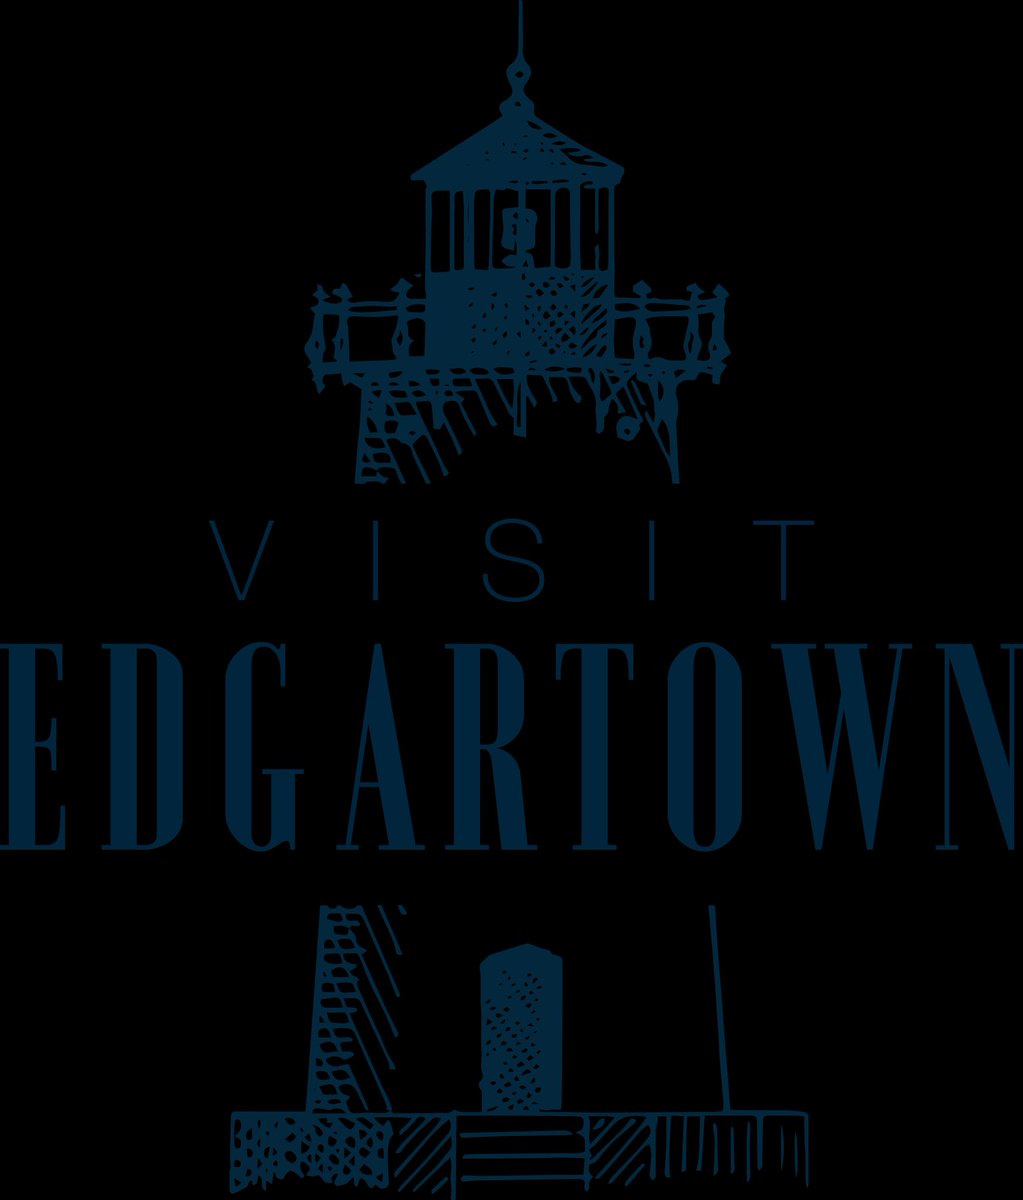 Porchfest Edgartown: May 18th. As seen in towns across the country, Edgartown is excited to coordinate Porchfest: a musical event for the community, by the community, it will be a lyrical day of family, friends and fun. Rain date: May 19th. #VisitMA buff.ly/3VTj06X